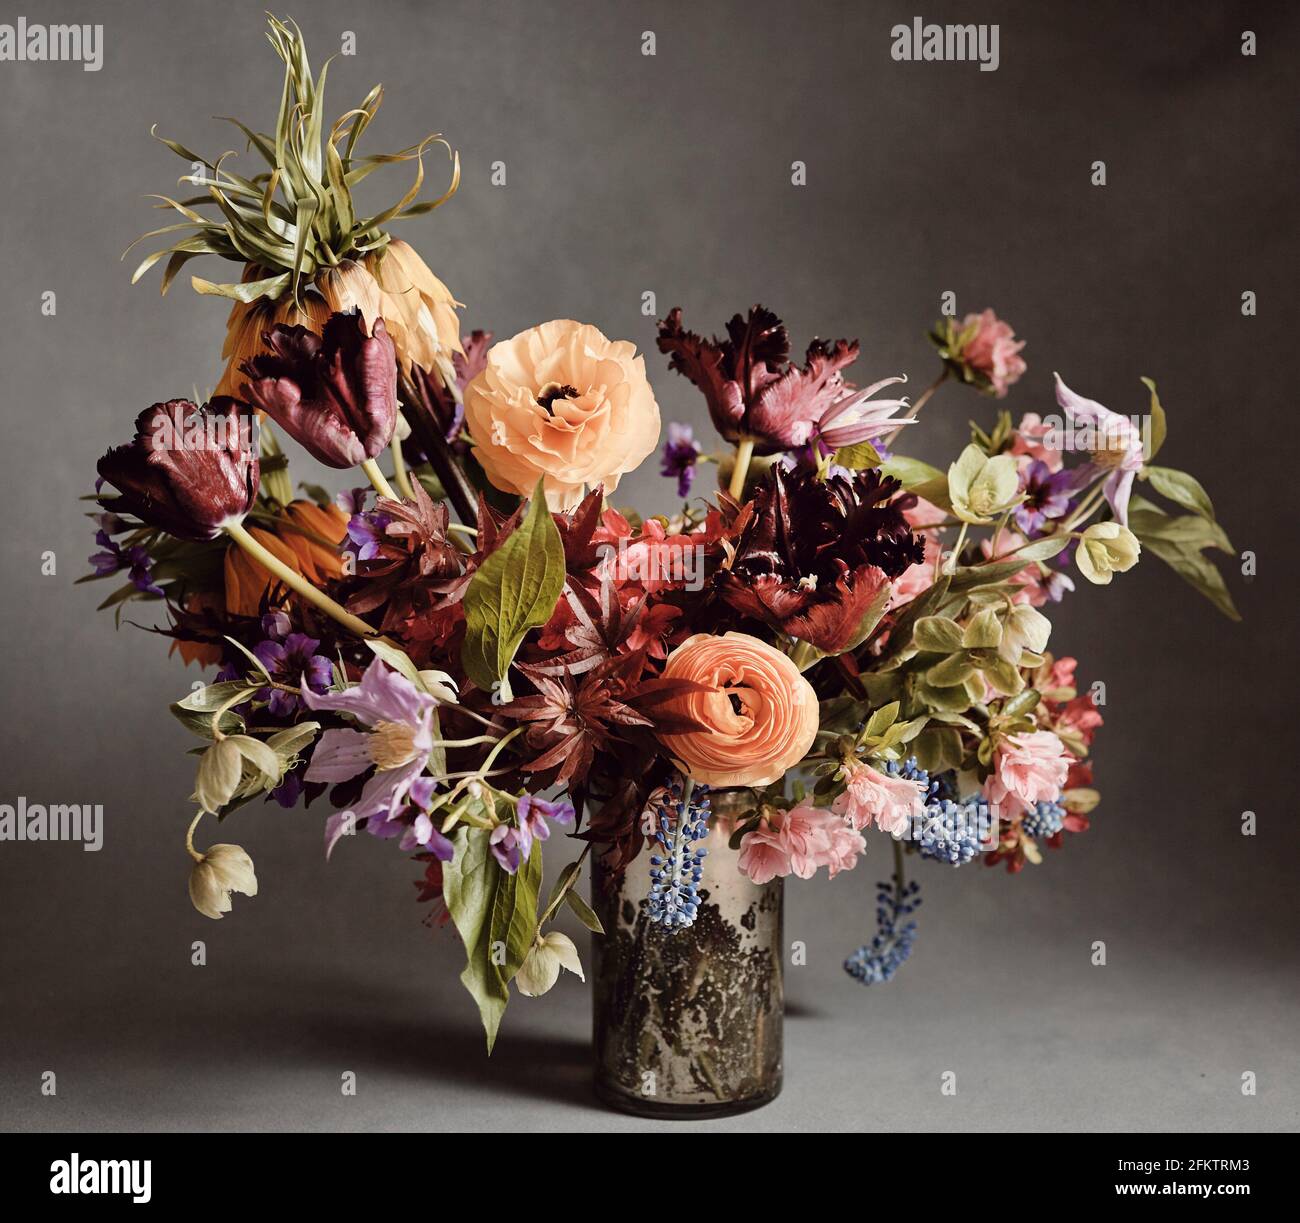 A bouquet of red, orange, purple, green and blue flowers in a mercury glass vase against a grey backdrop. Stock Photo